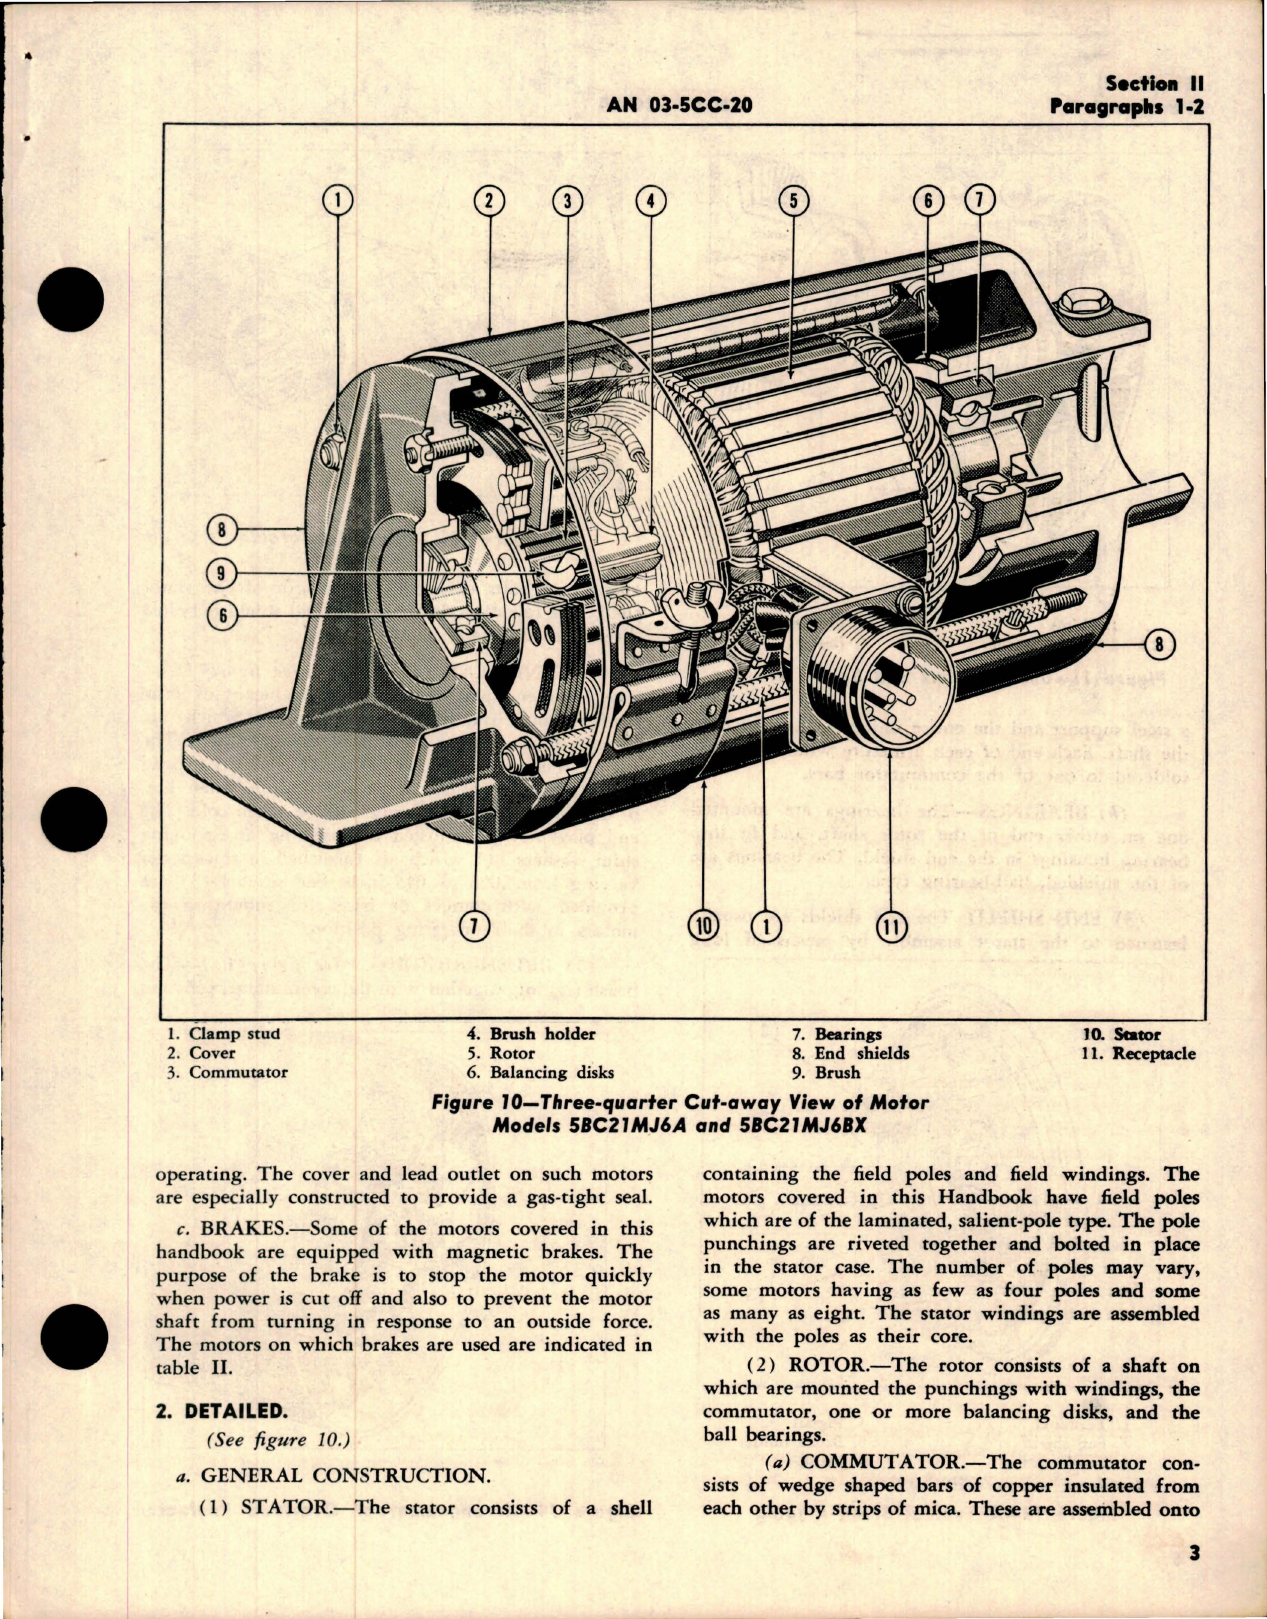 Sample page 7 from AirCorps Library document: Parts Catalog for Aircraft Motors - Models 5BC21 and 5BC31 Series